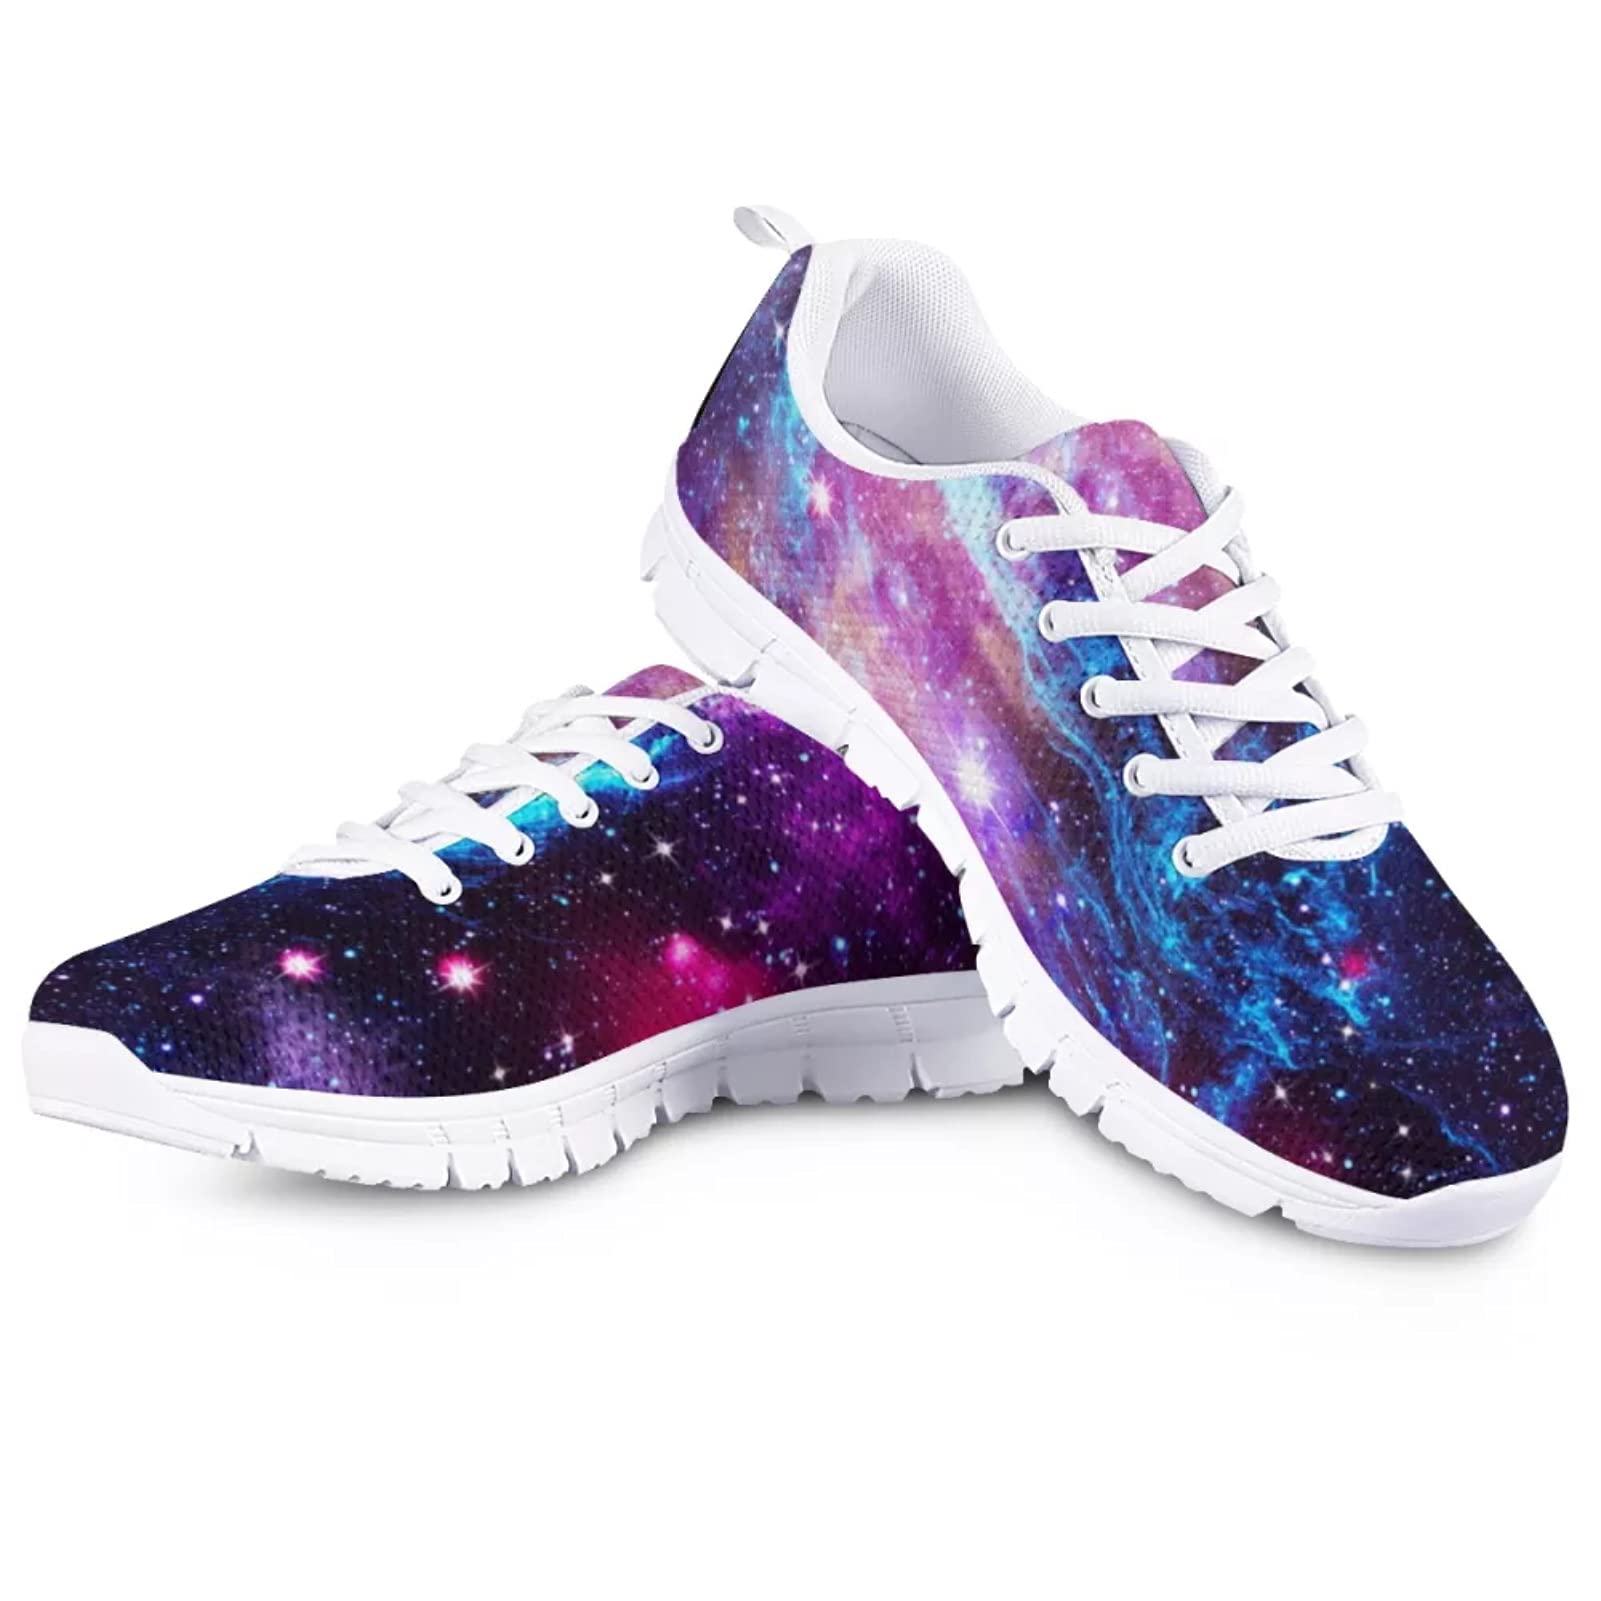 Wanyint Women Men Running Shoes Spider Web Cobweb Halloween Print Athletic Gym Tennis Shoes for Lady, Breathable Sneakers for Indoor Outdoor Gym Travel